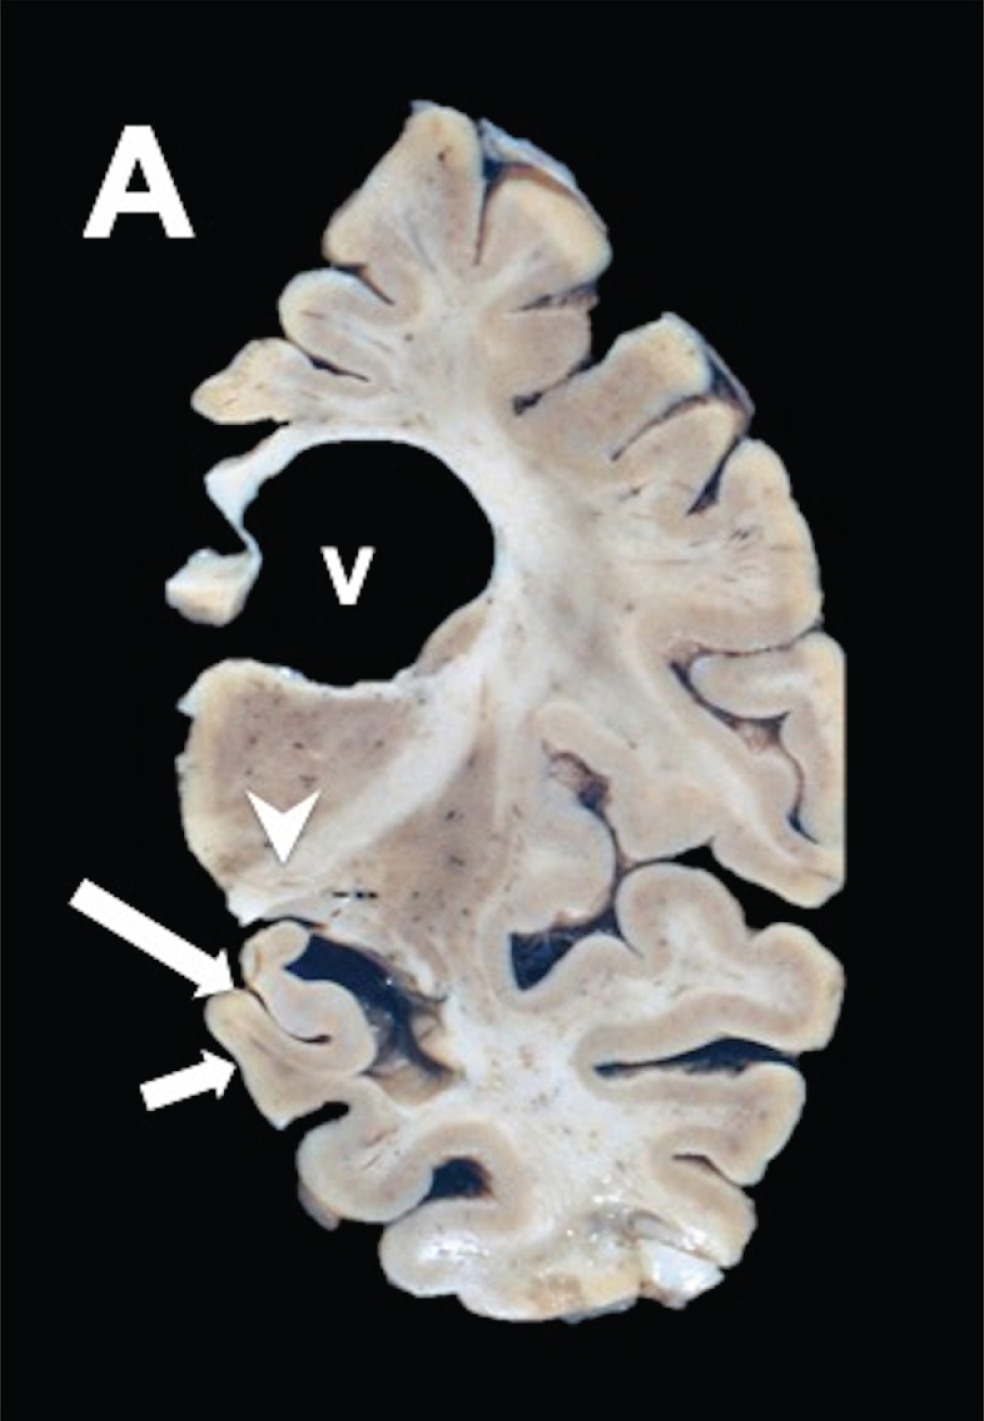 PSP coronal brain section of the brain stem shows discrete 
frontotemporal atrophy, quadrigeminal cistern atrophy, and sieve 
state in frontal periventricular white matter, and thalamus.